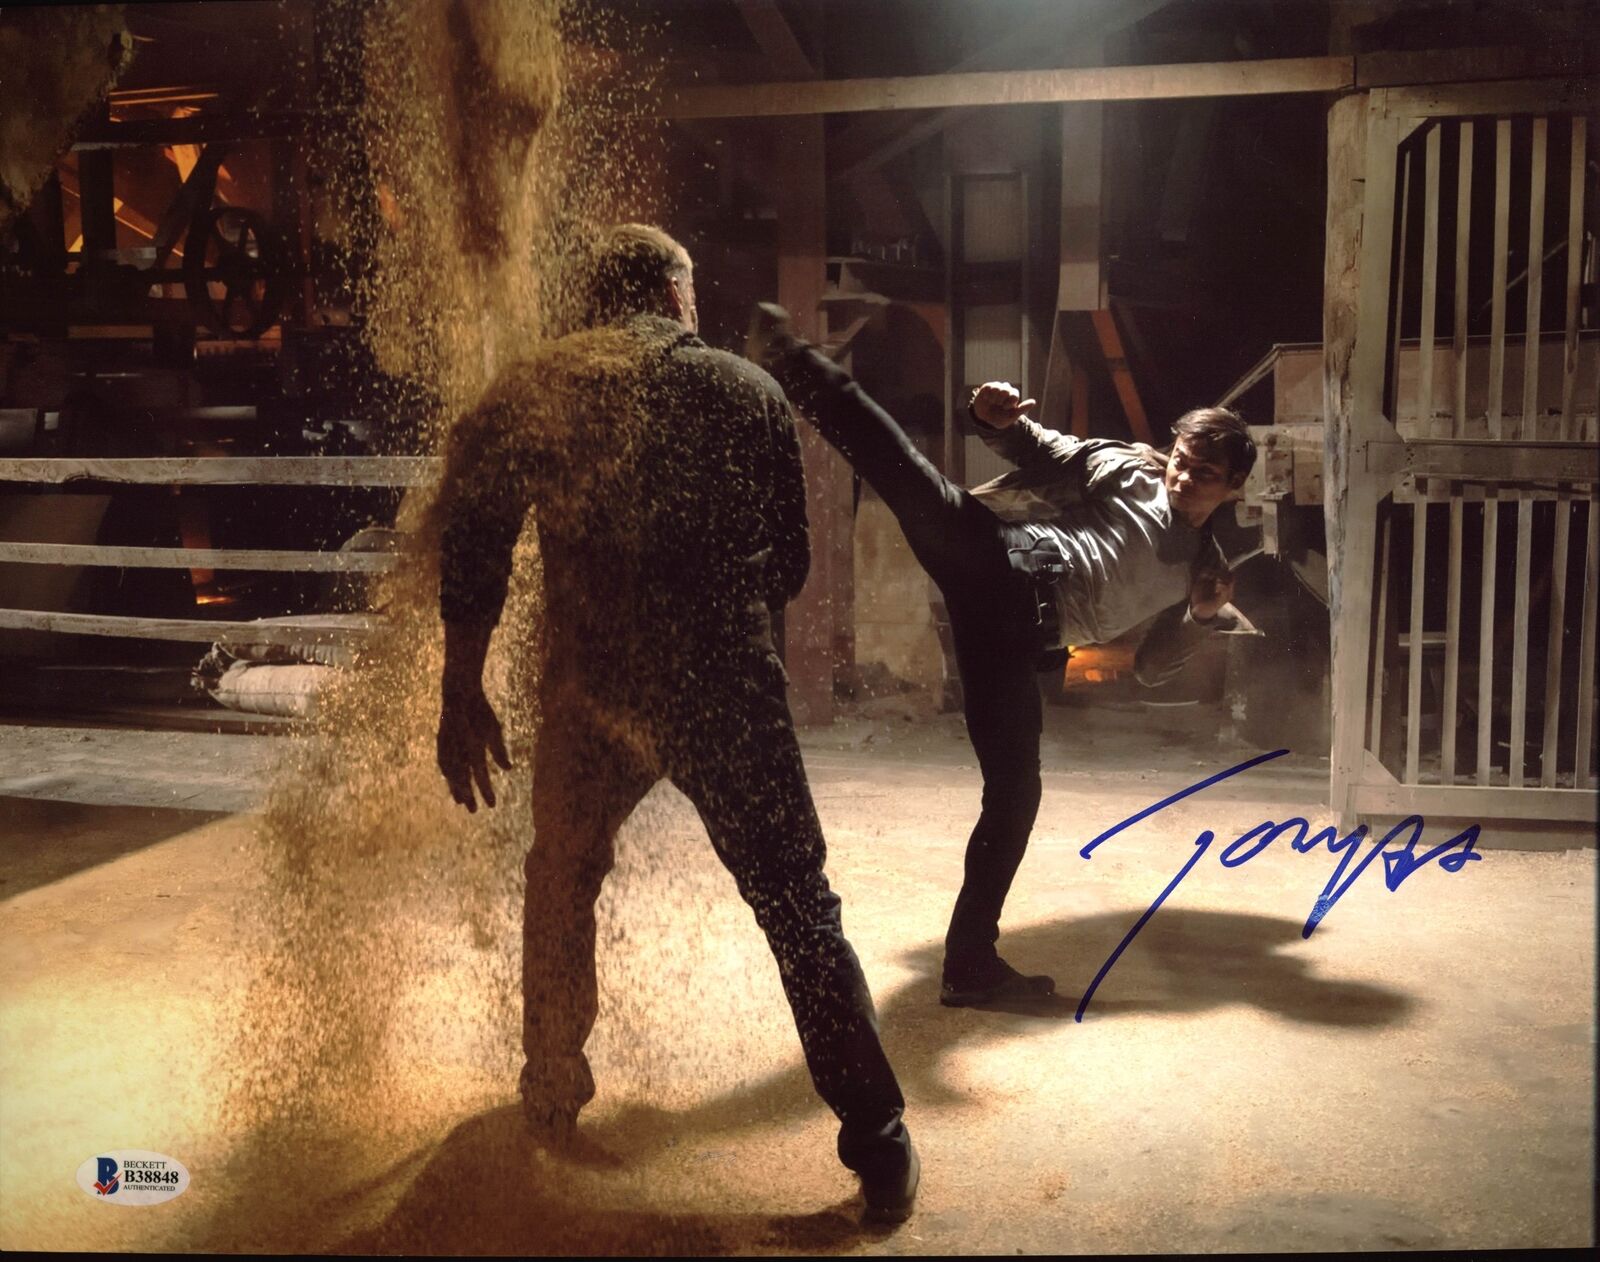 Tony Jaa Ong-Bak Authentic Signed 11X14 Photo Poster painting Autographed BAS #B38848